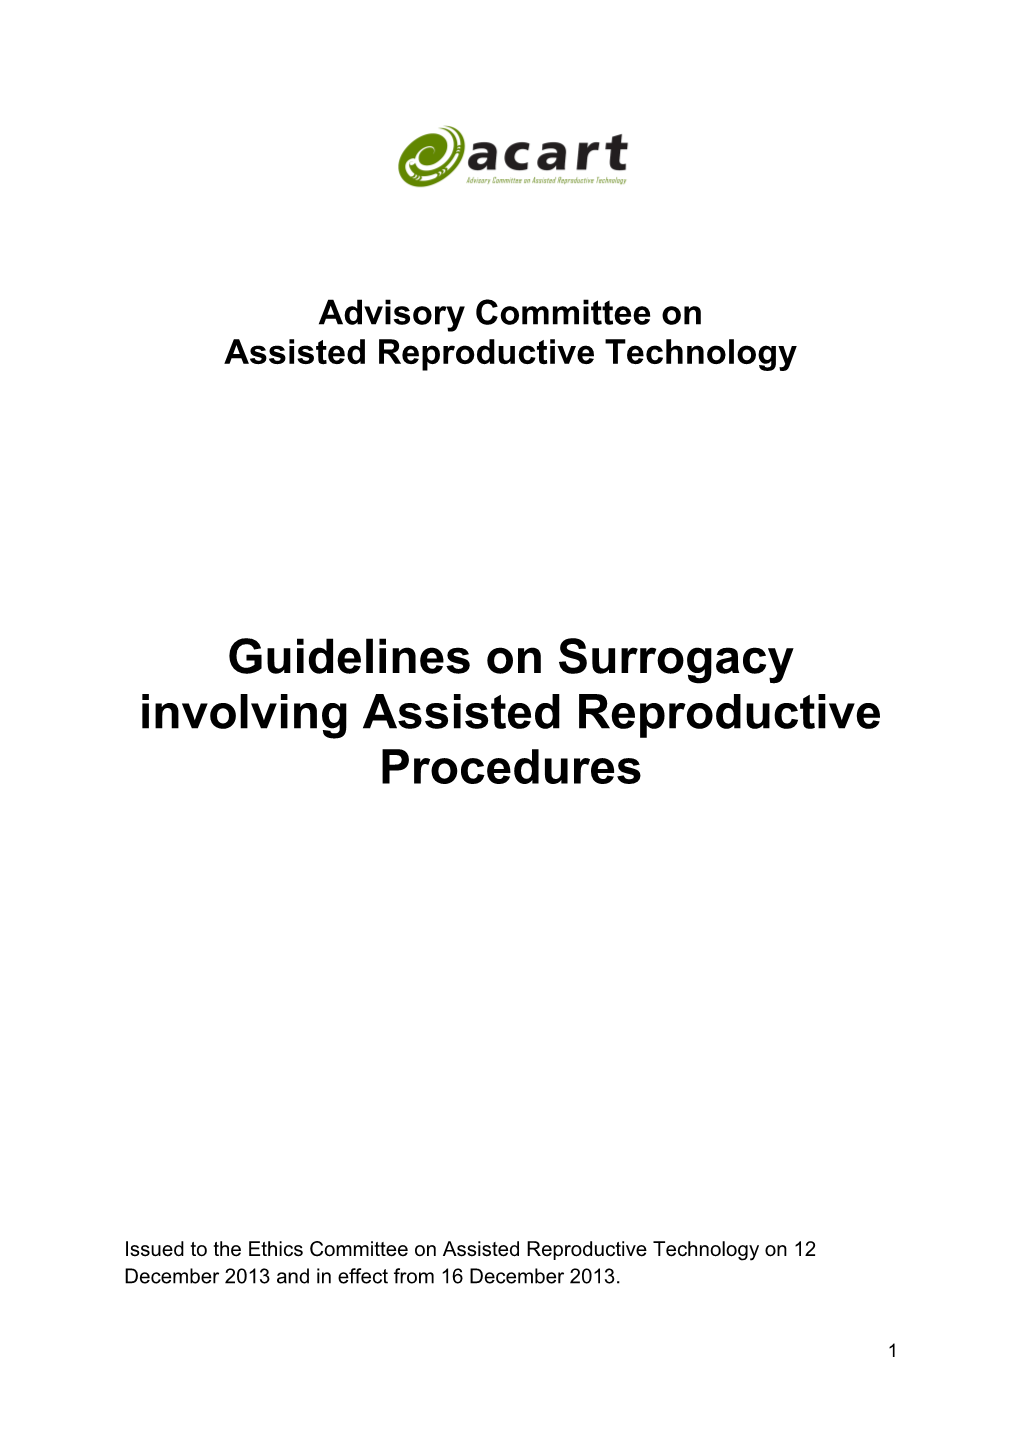 Advisory Committee on Assisted Reproductive Technology